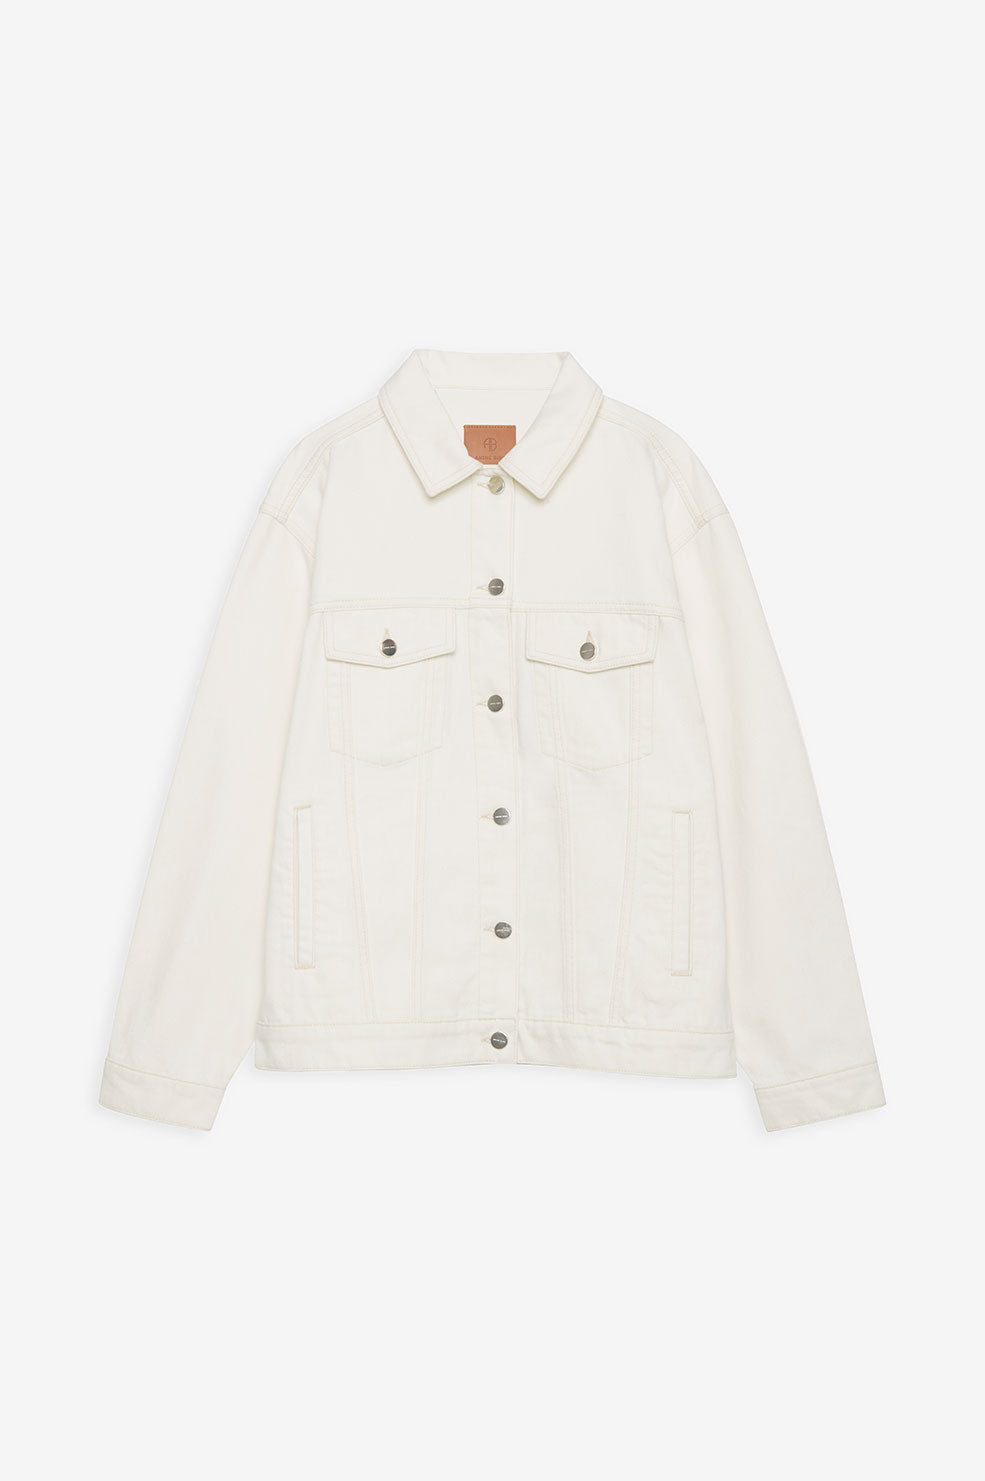 ANINE BING Rory Jacket - Ecru White - Front View